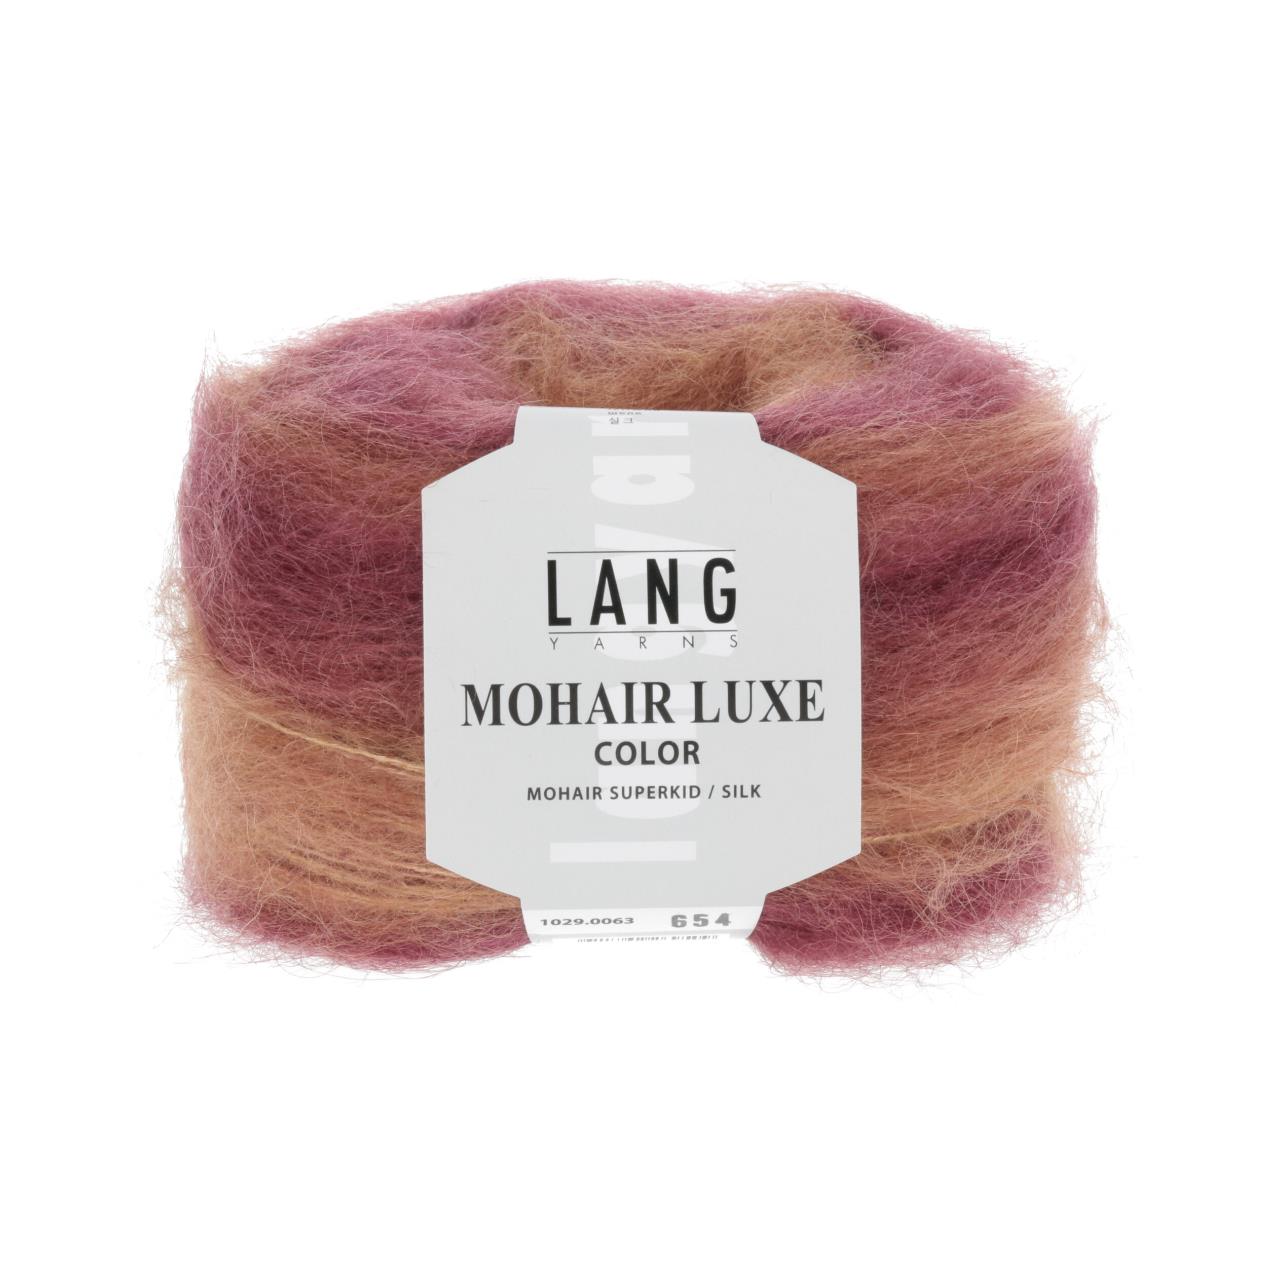 Mohair Luxe Color 63 Dunkelrot